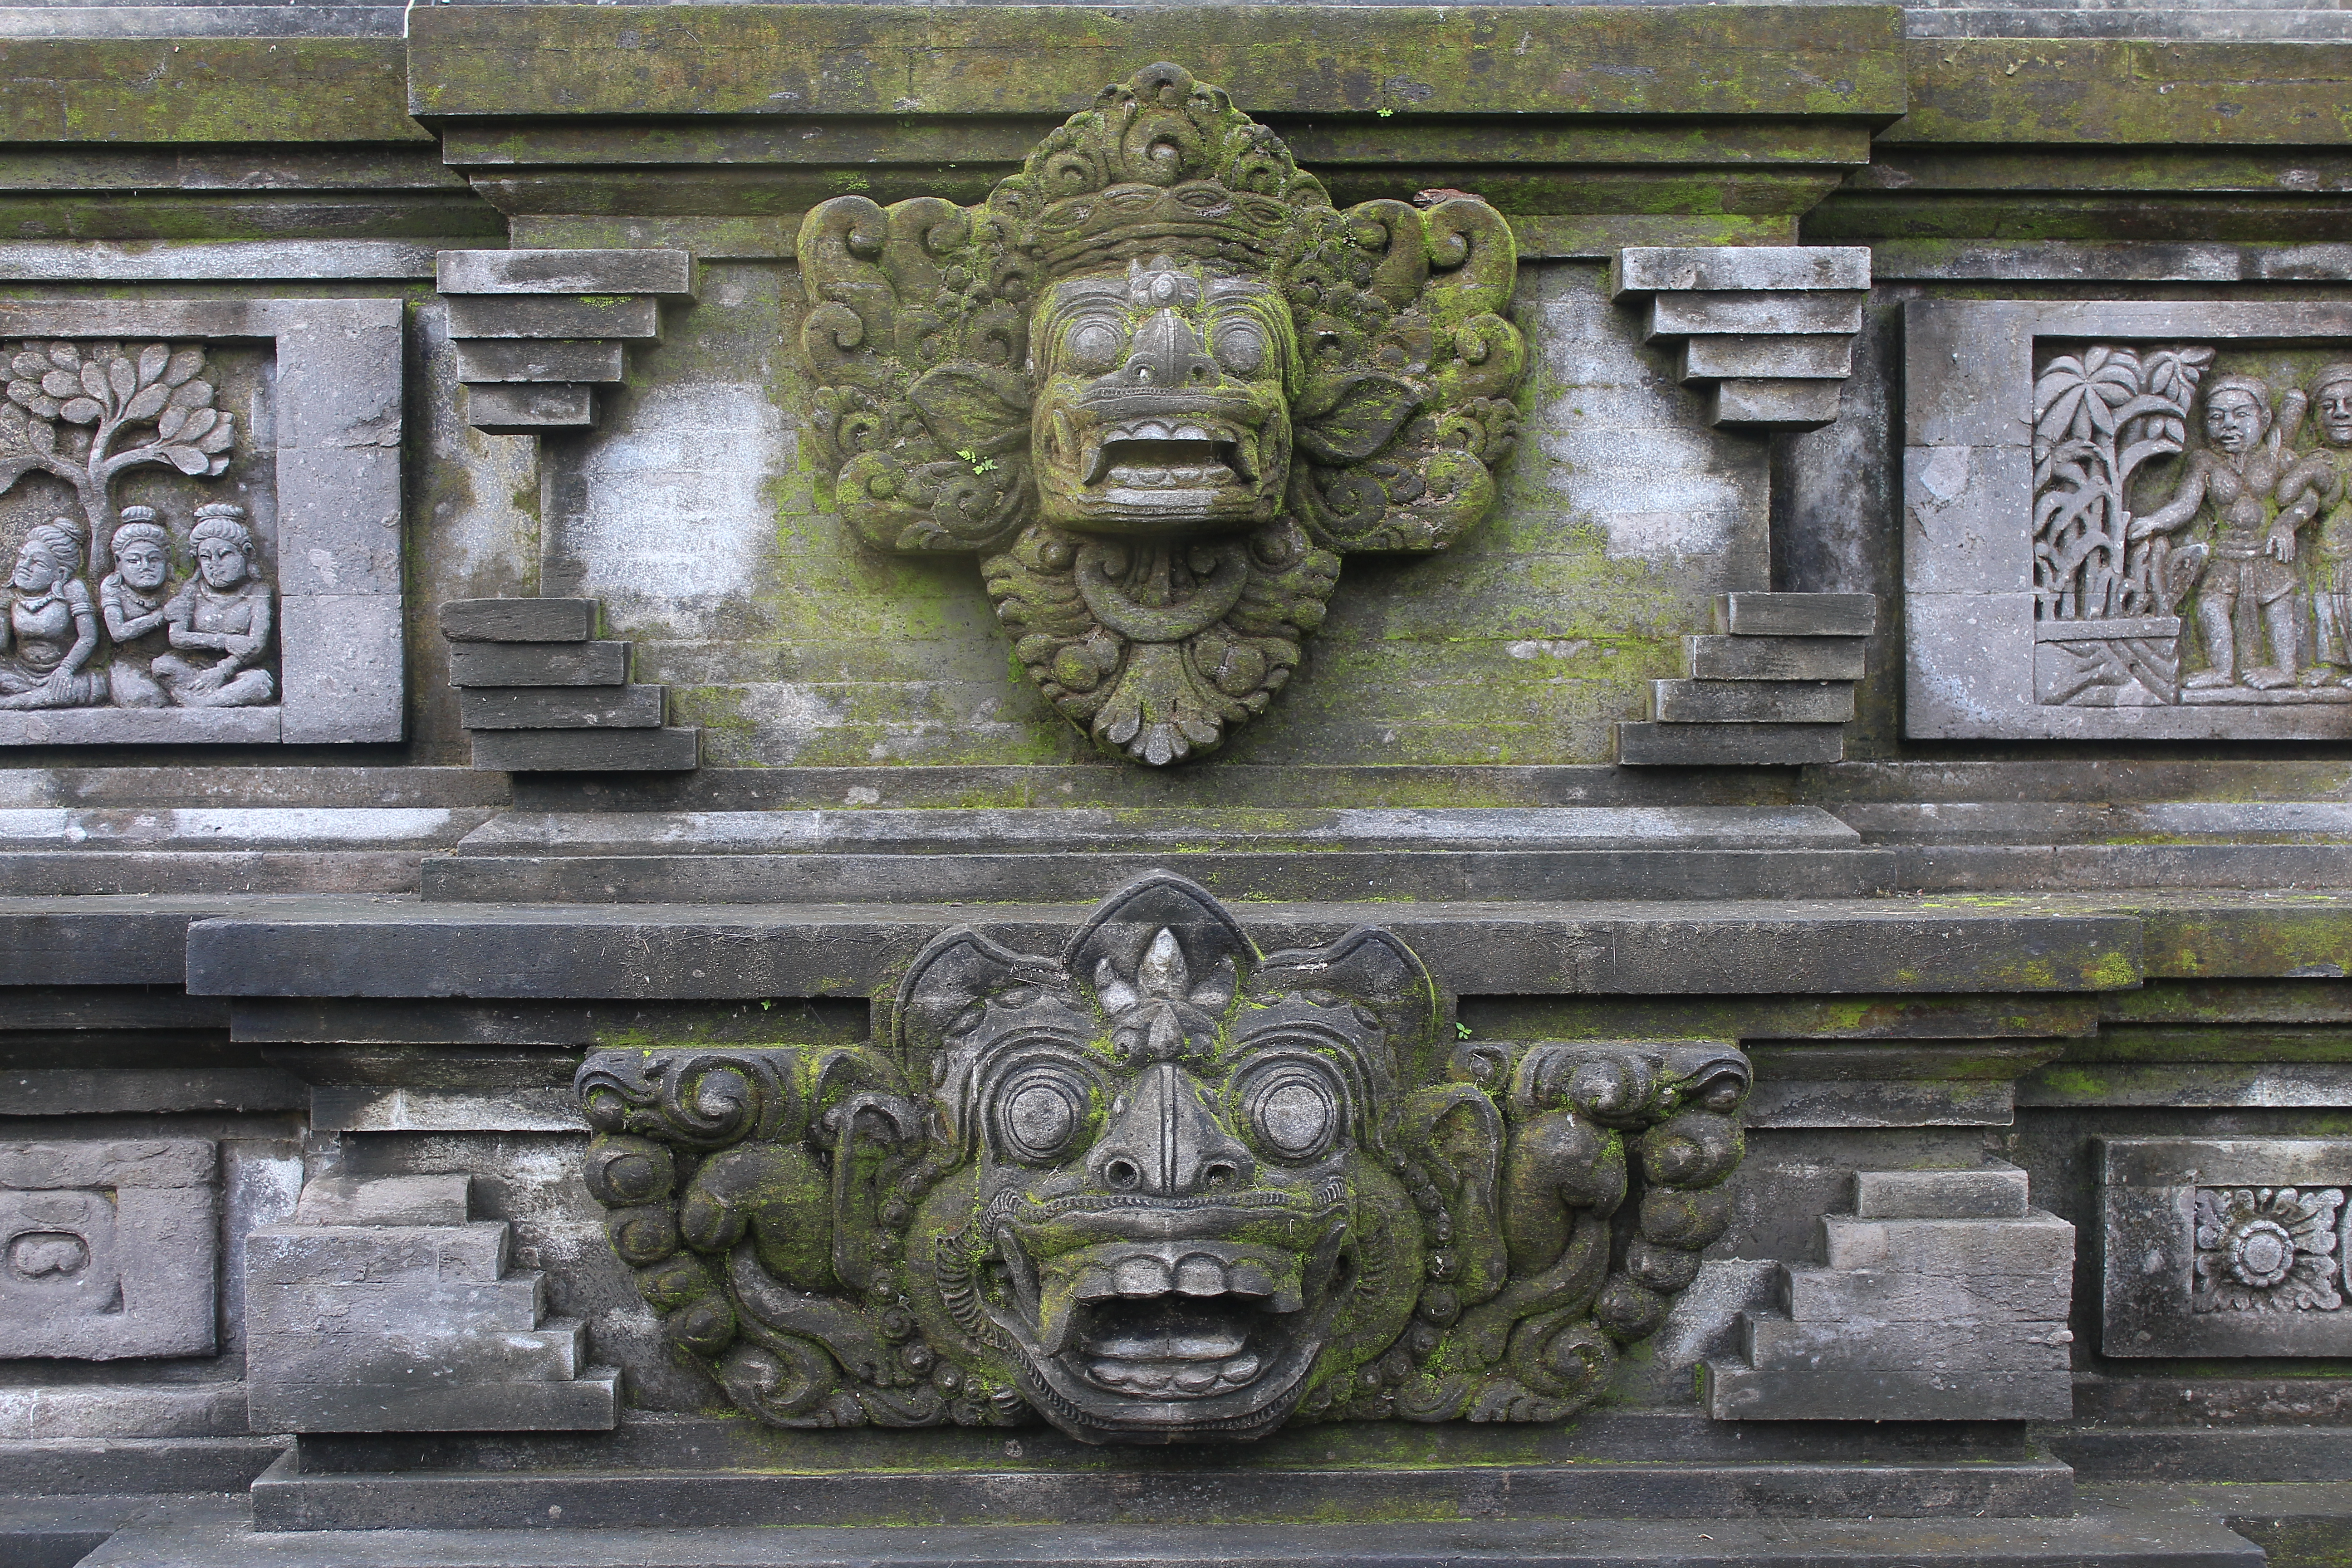 Demonic face carved on temple